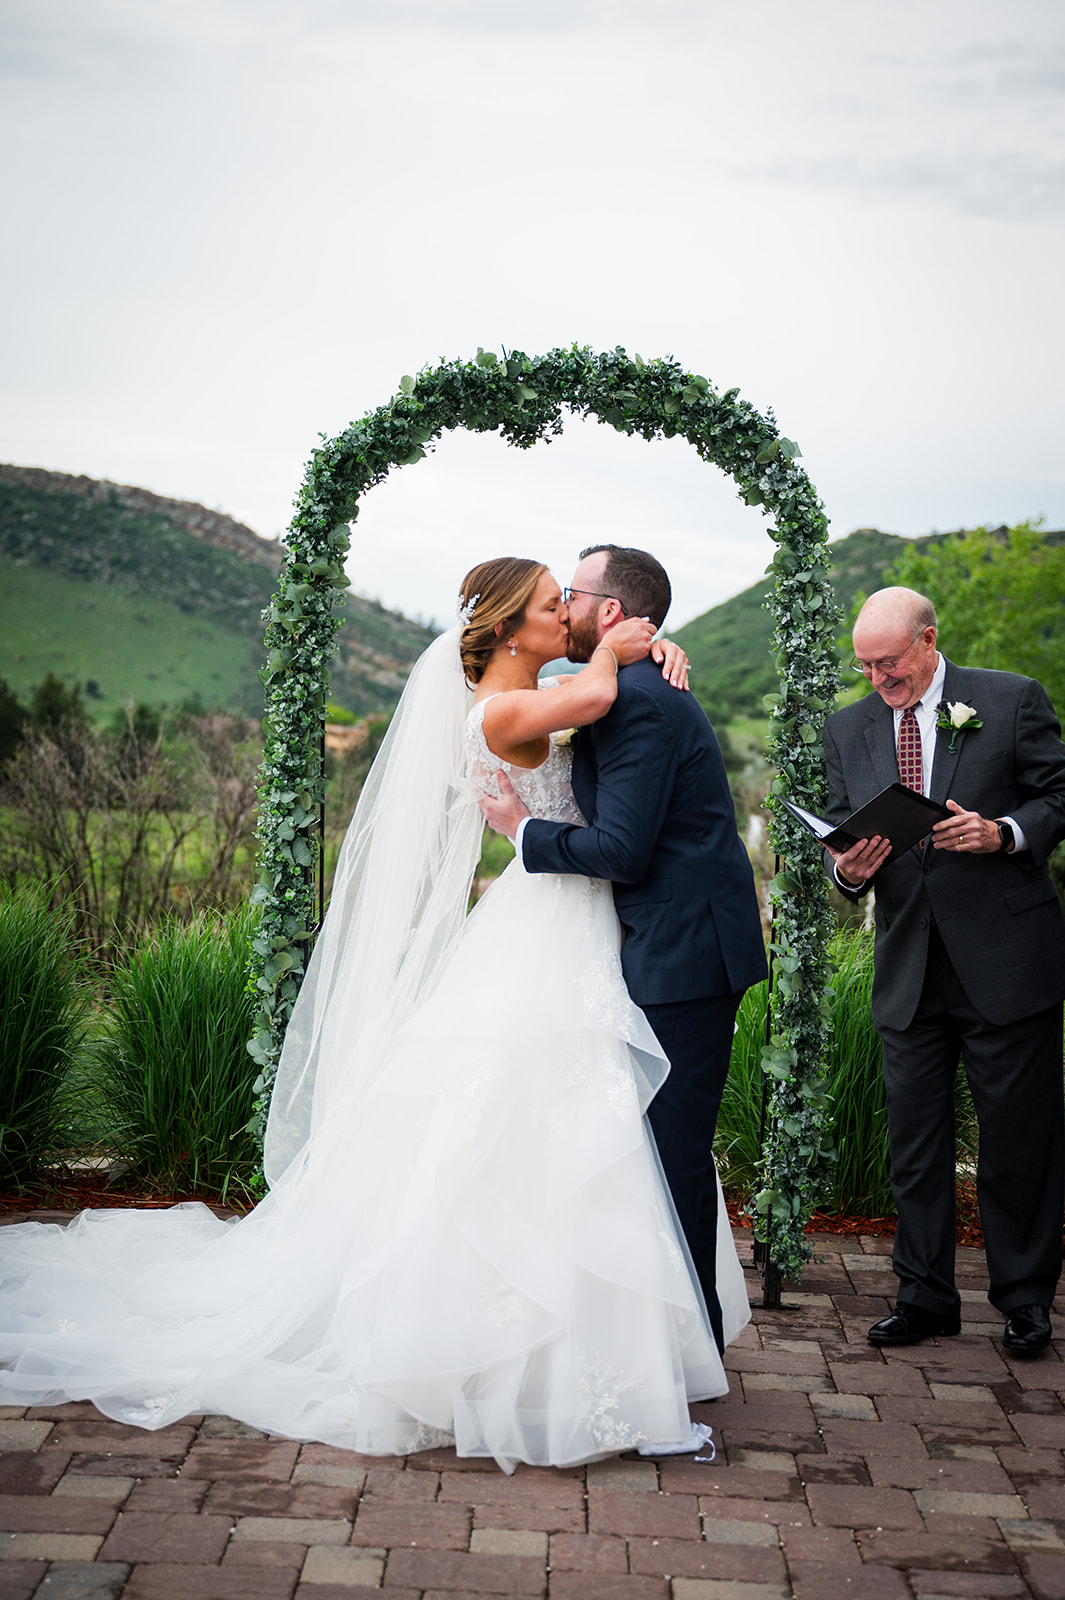 Bride and groom share their first kiss at the end of their wedding ceremony.